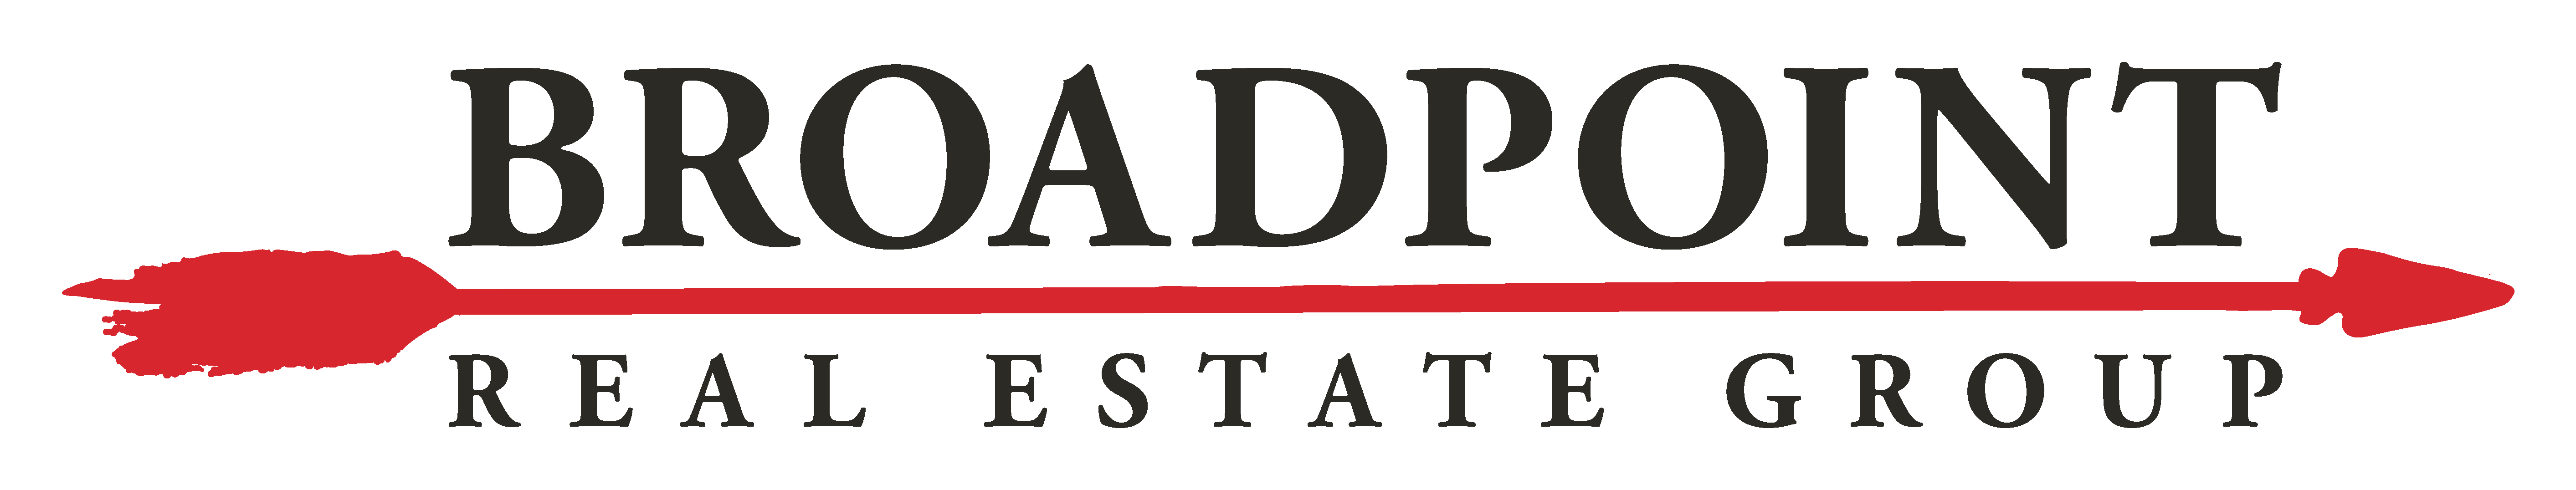 BroadPoint Real Estate Group